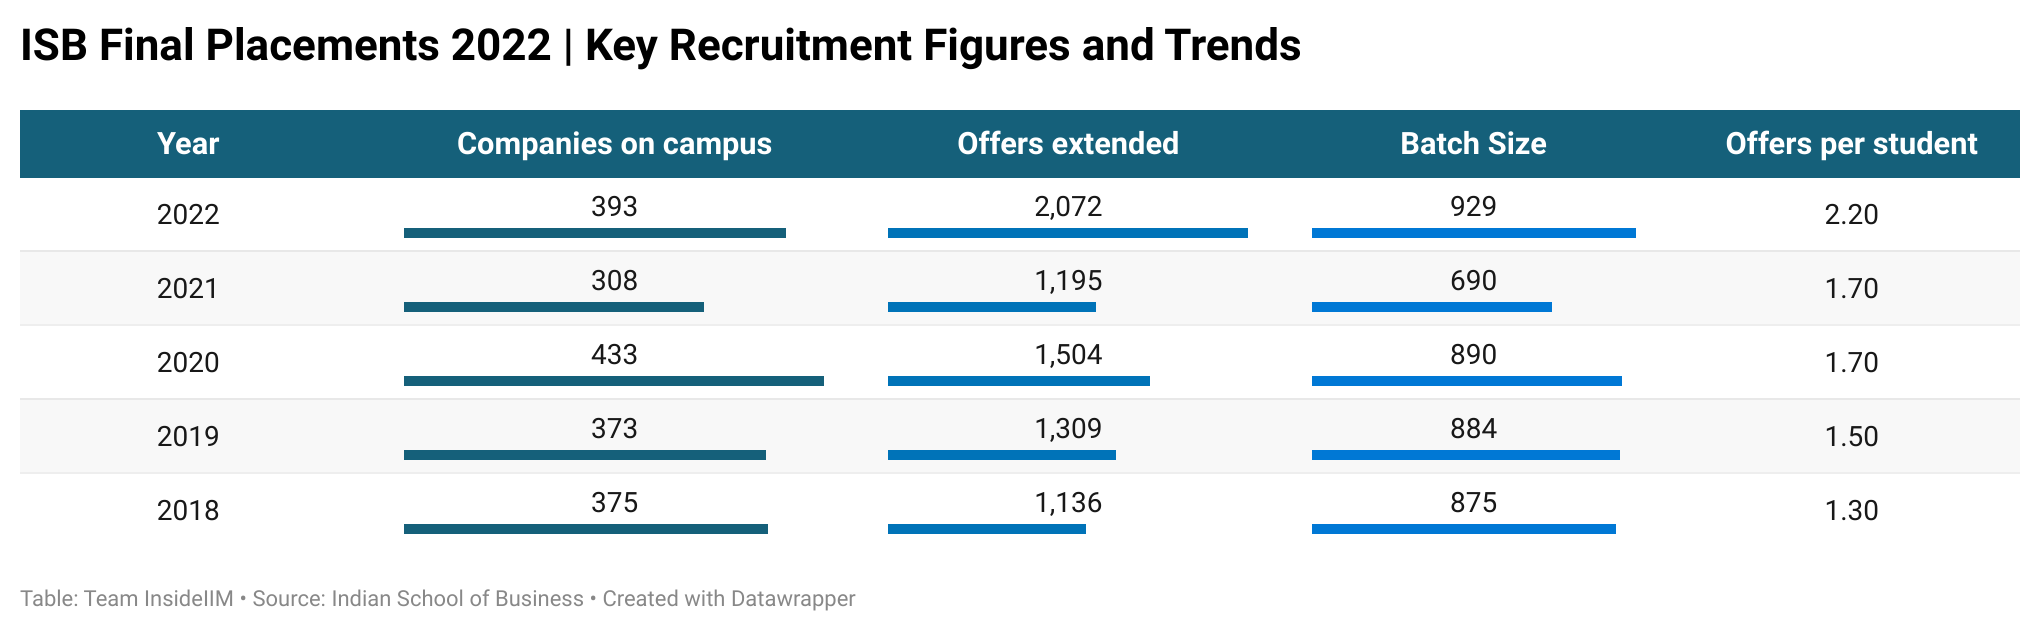 ISB Placements 2022 - Key Recruitment Figures and Trends